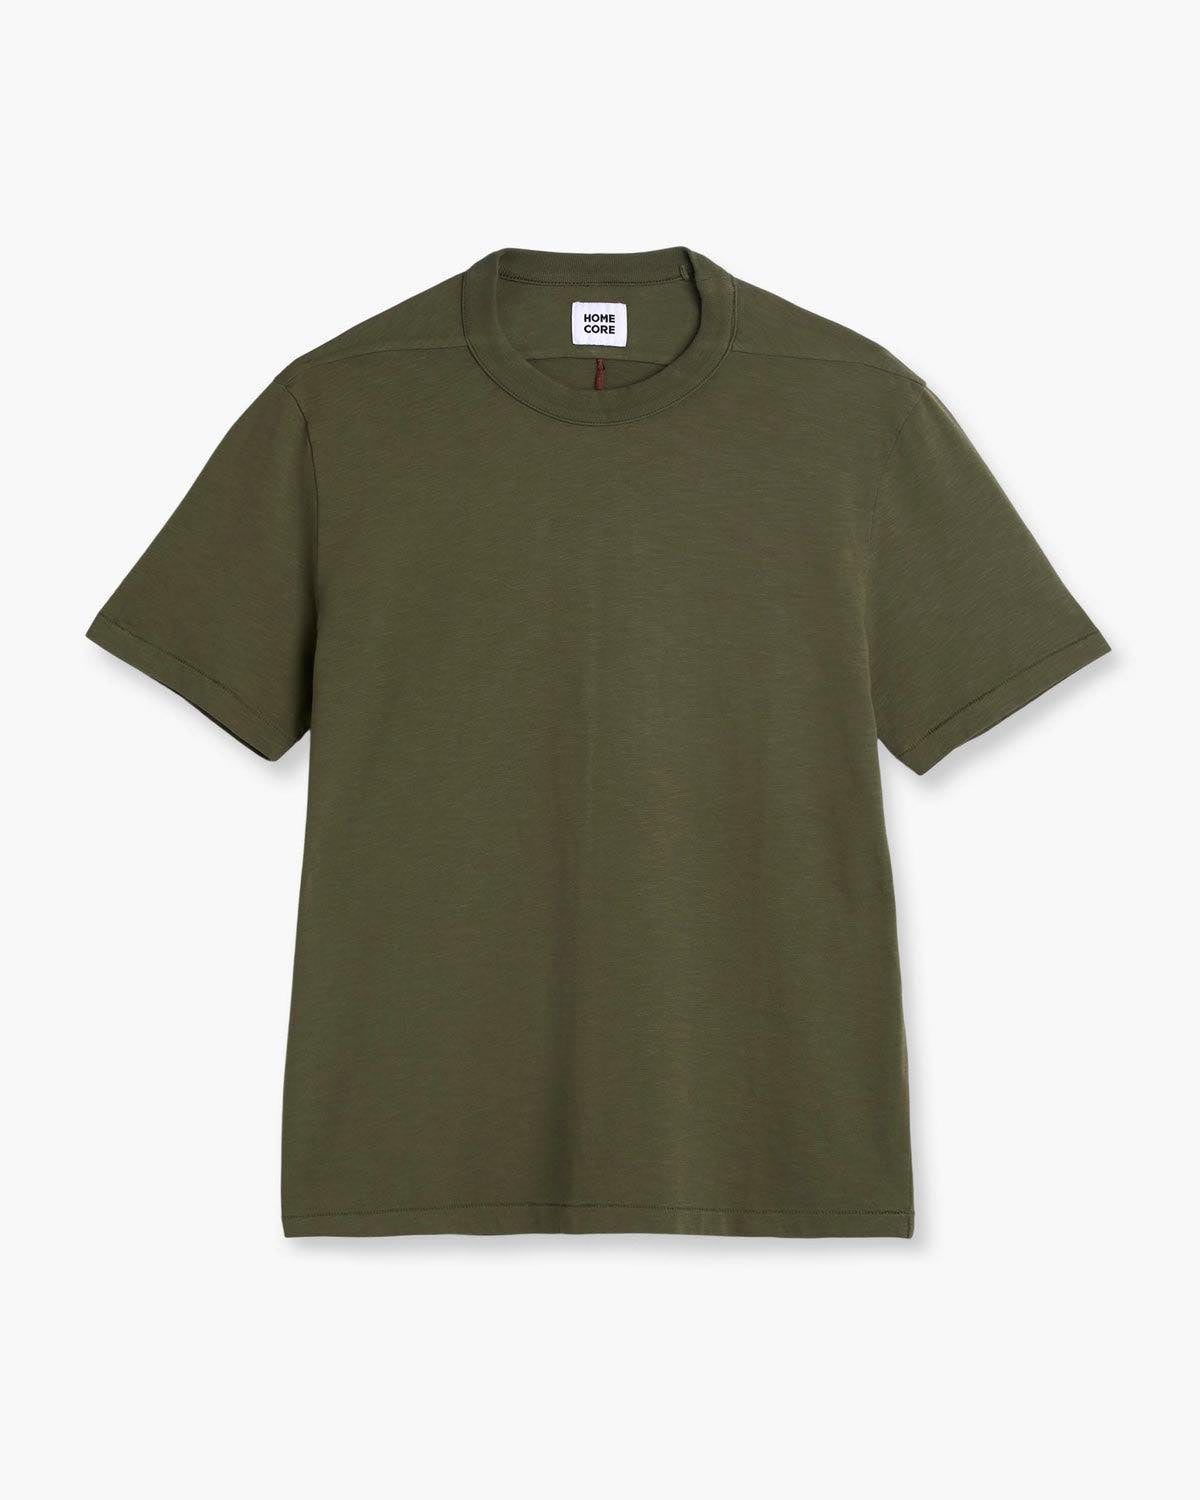 HOMECORE RODGER H - ARMY GREEN